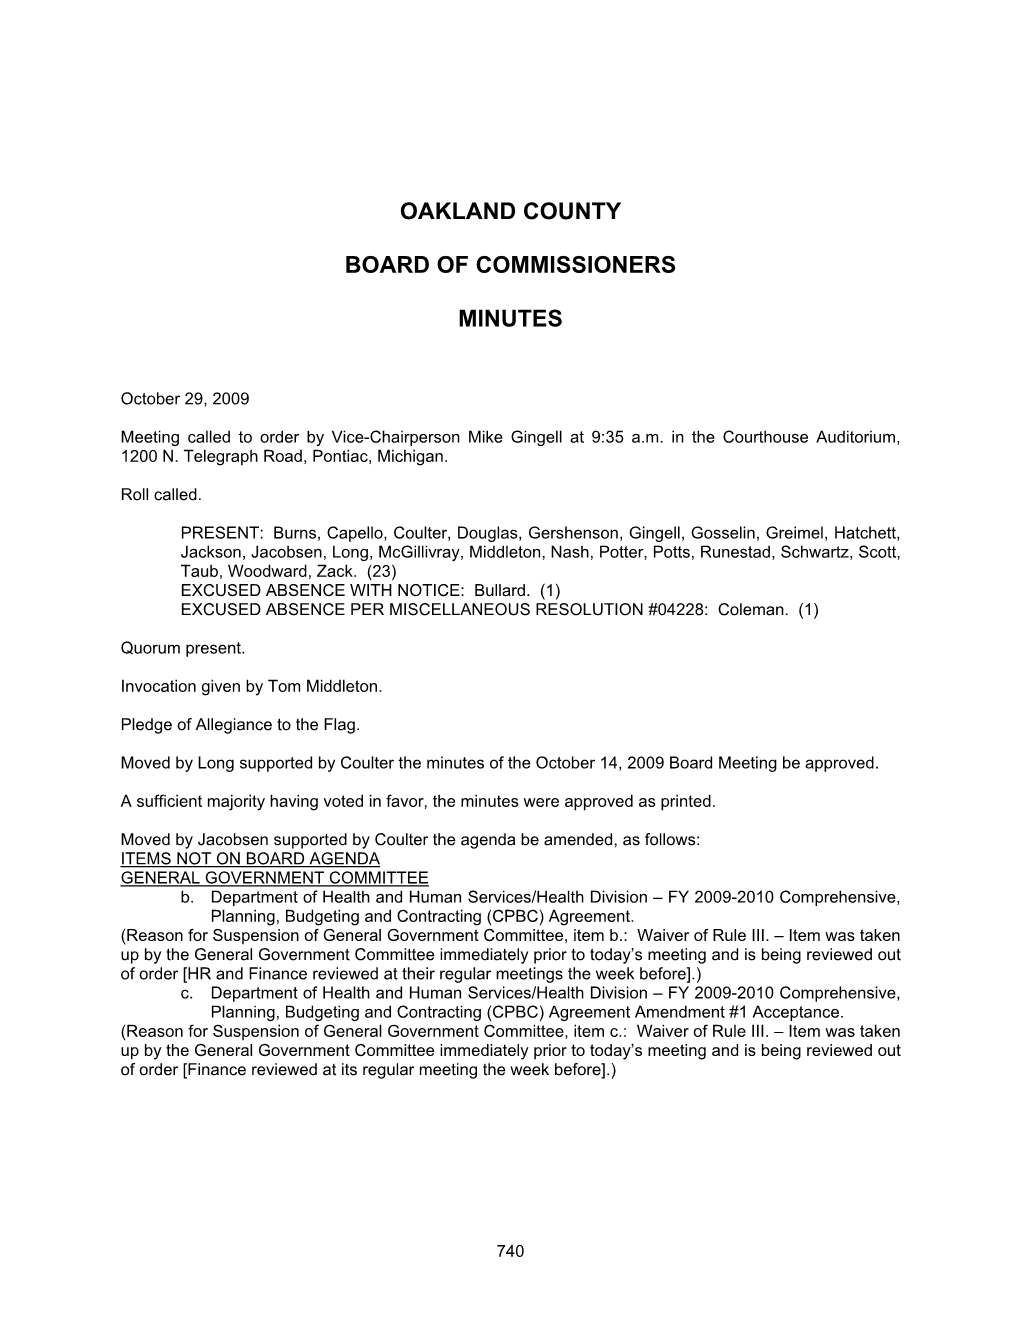 Oakland County Board of Commissioners Minutes